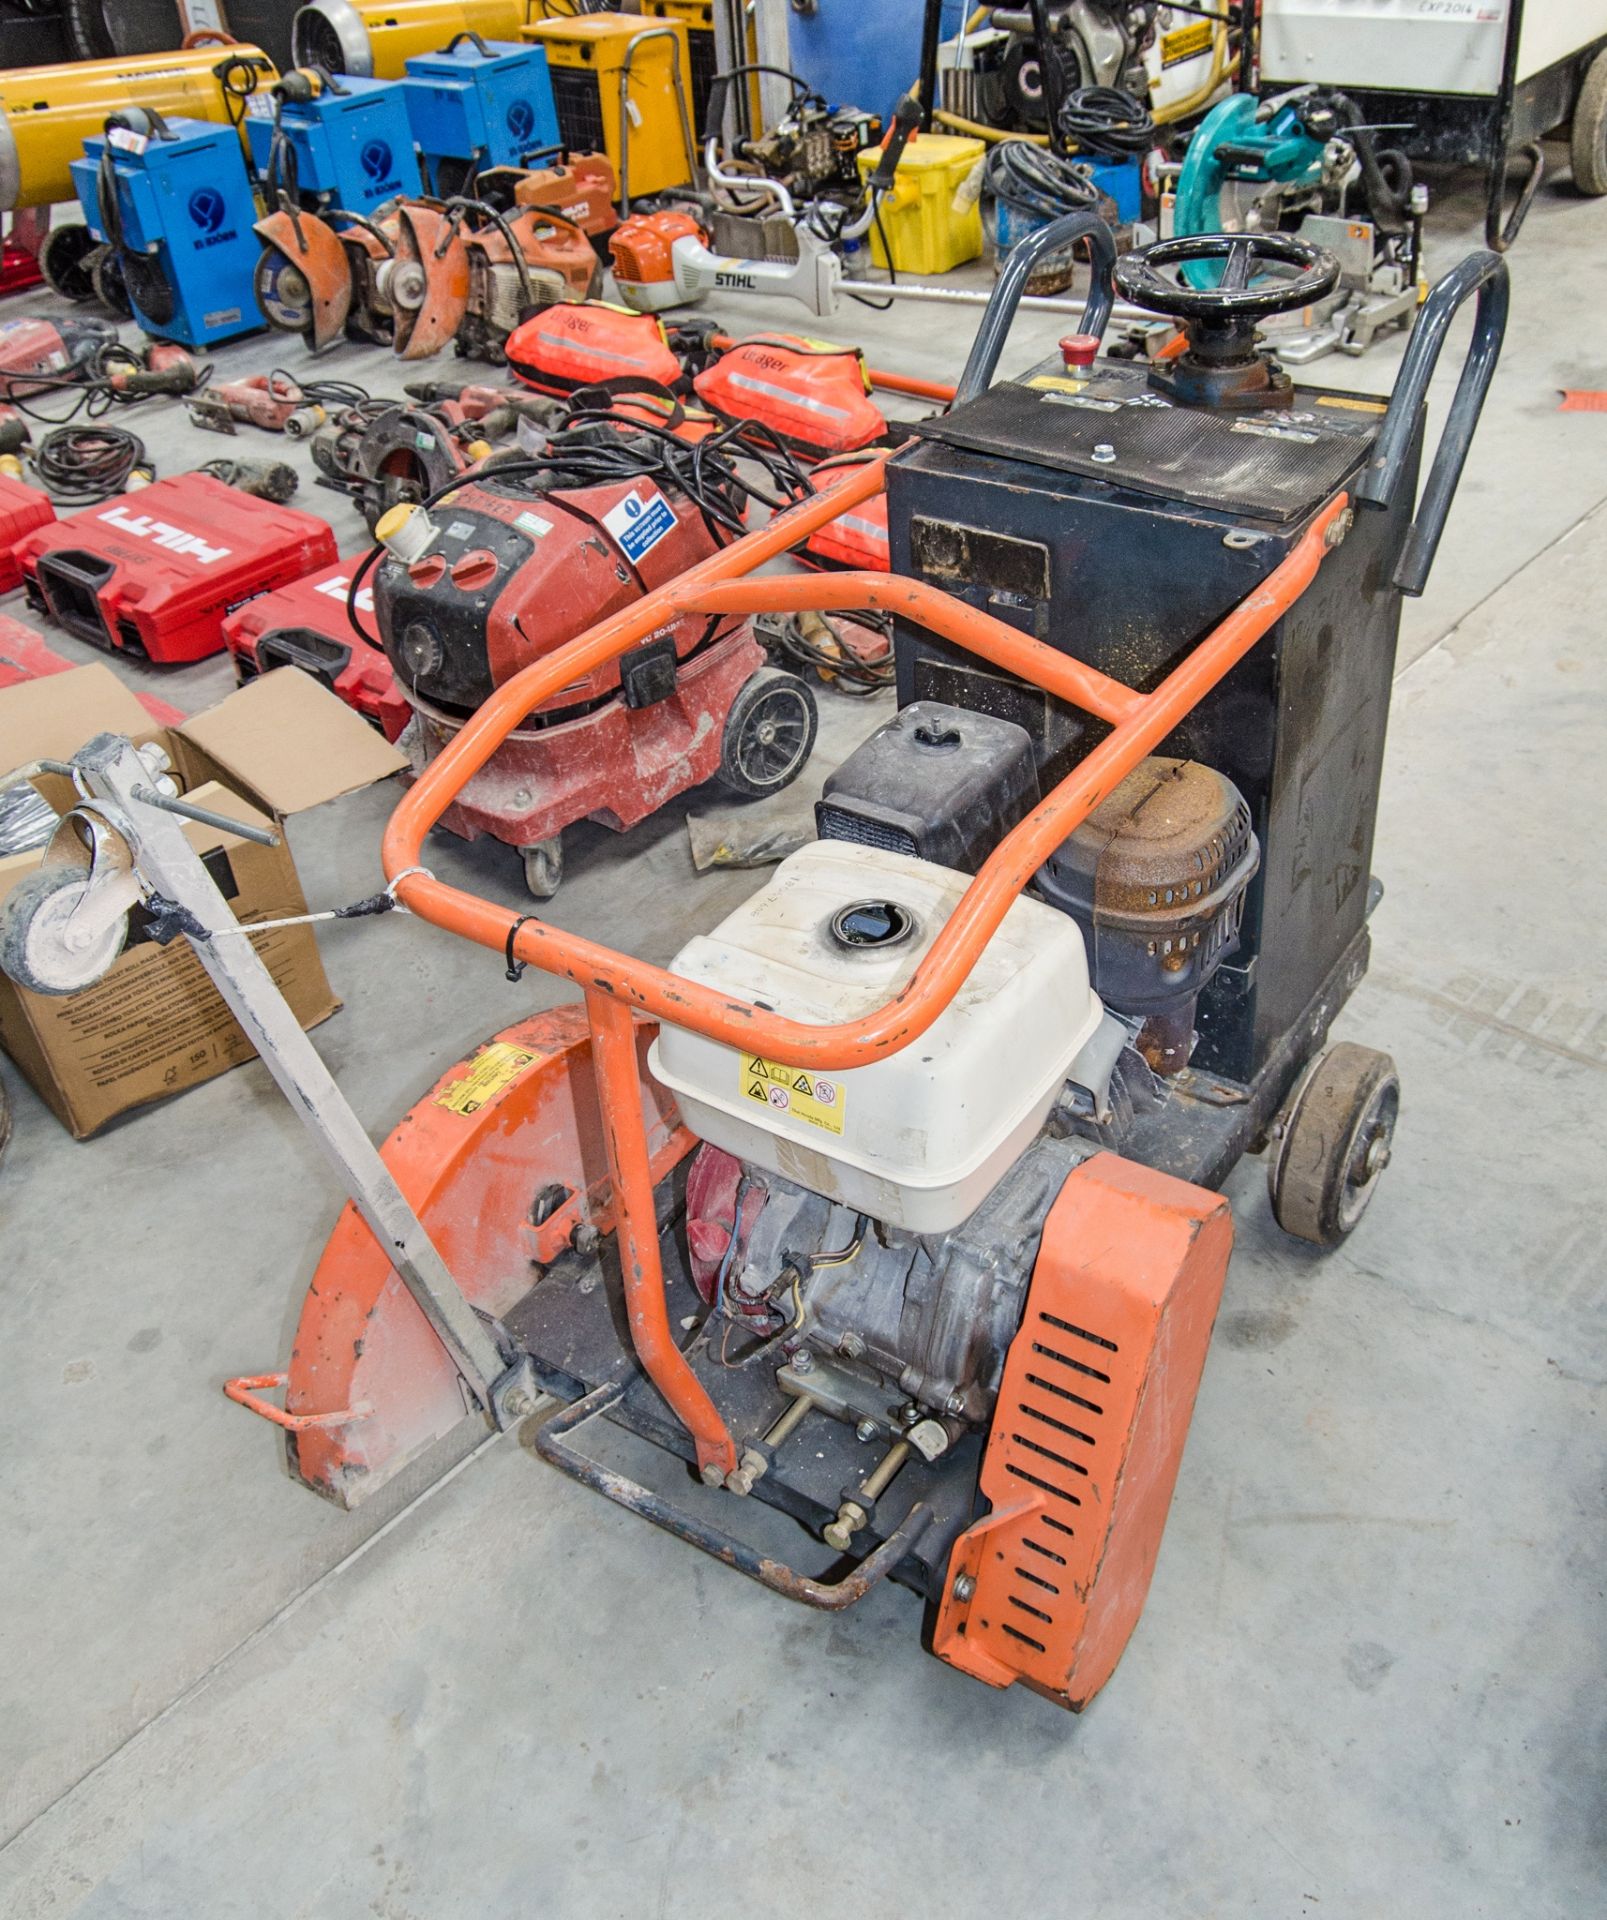 Altrad Ranger 450 petrol driven road saw ** Pull cord assembly missing ** 18067608